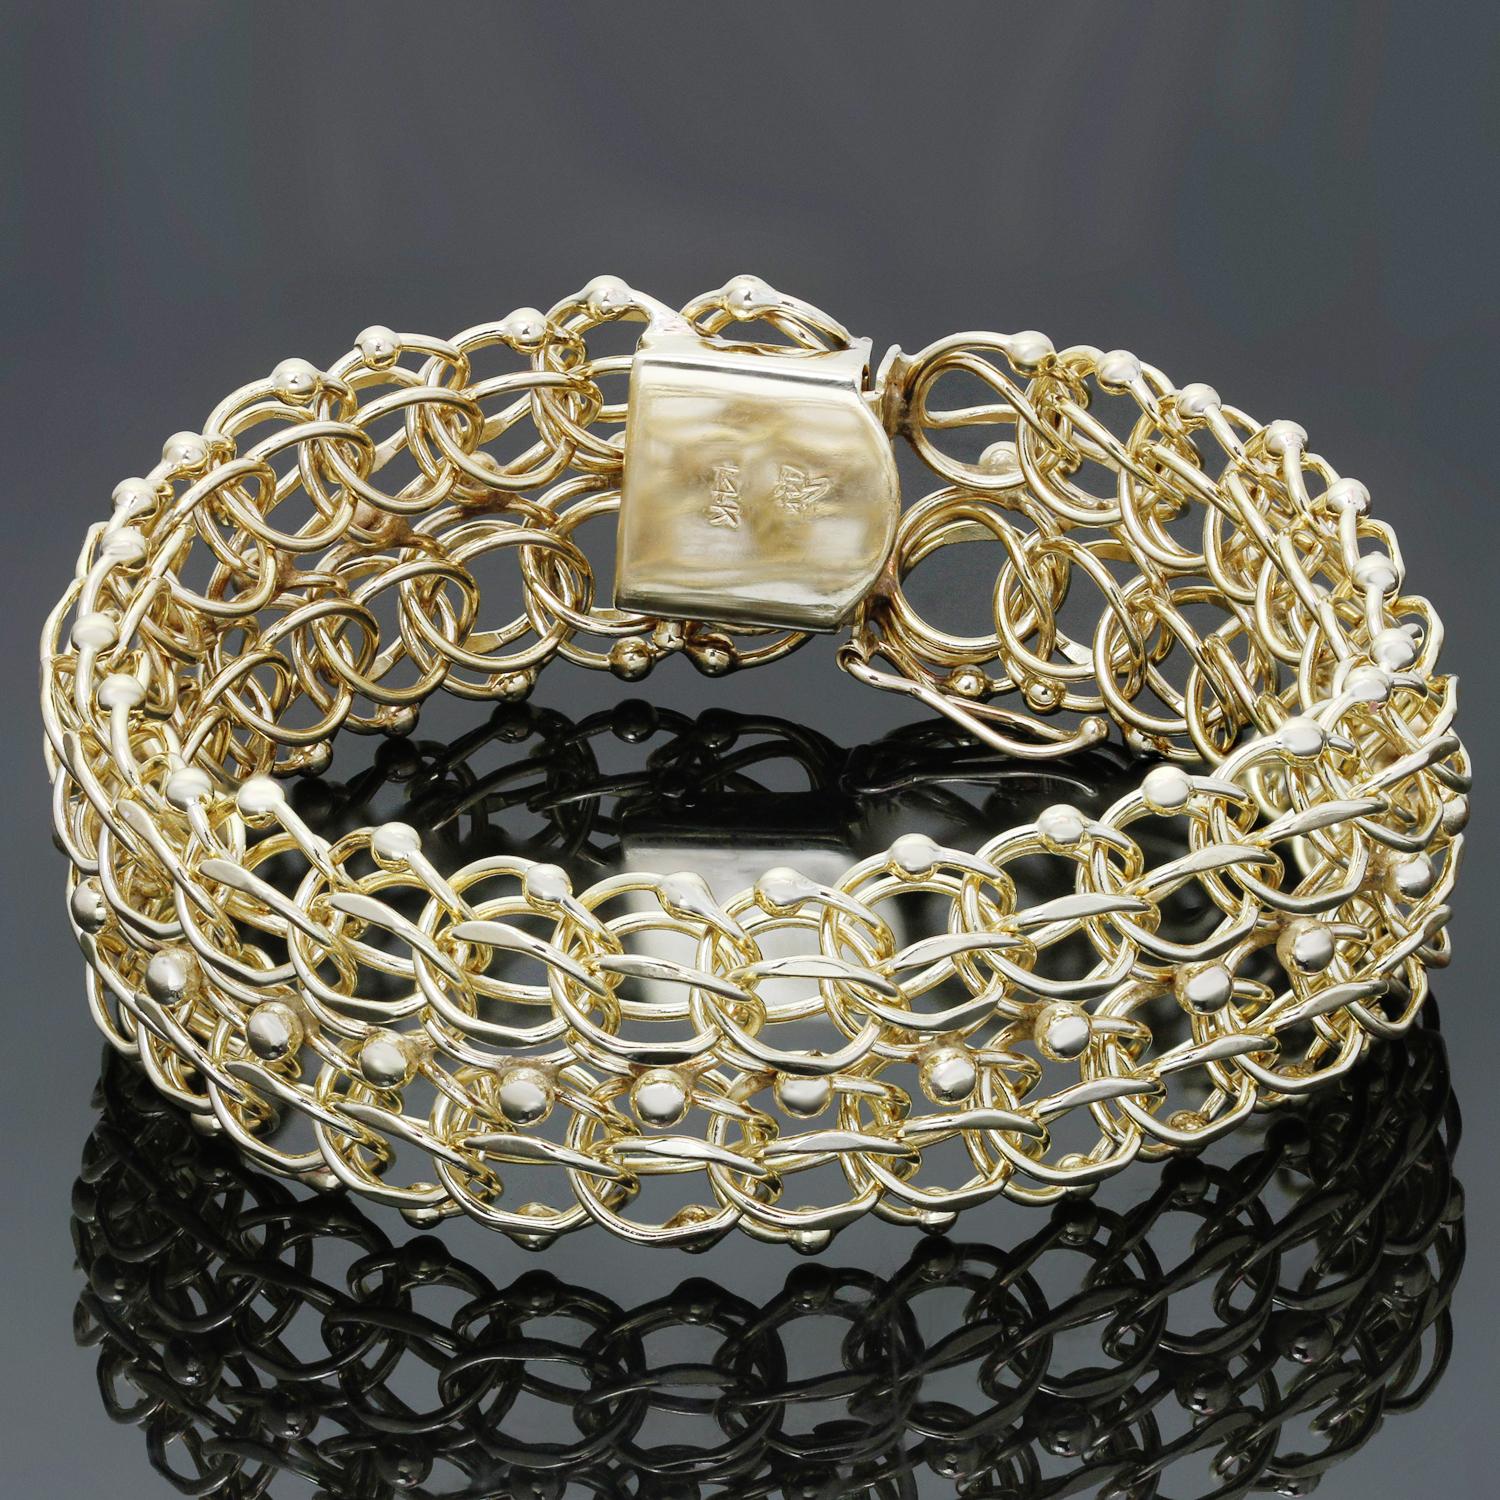 This classic vintage bracelet features a mesh-like open solid link design crafted in 14k yellow gold. Made in United Kingdom circa 1980s. Measurements: 0.82